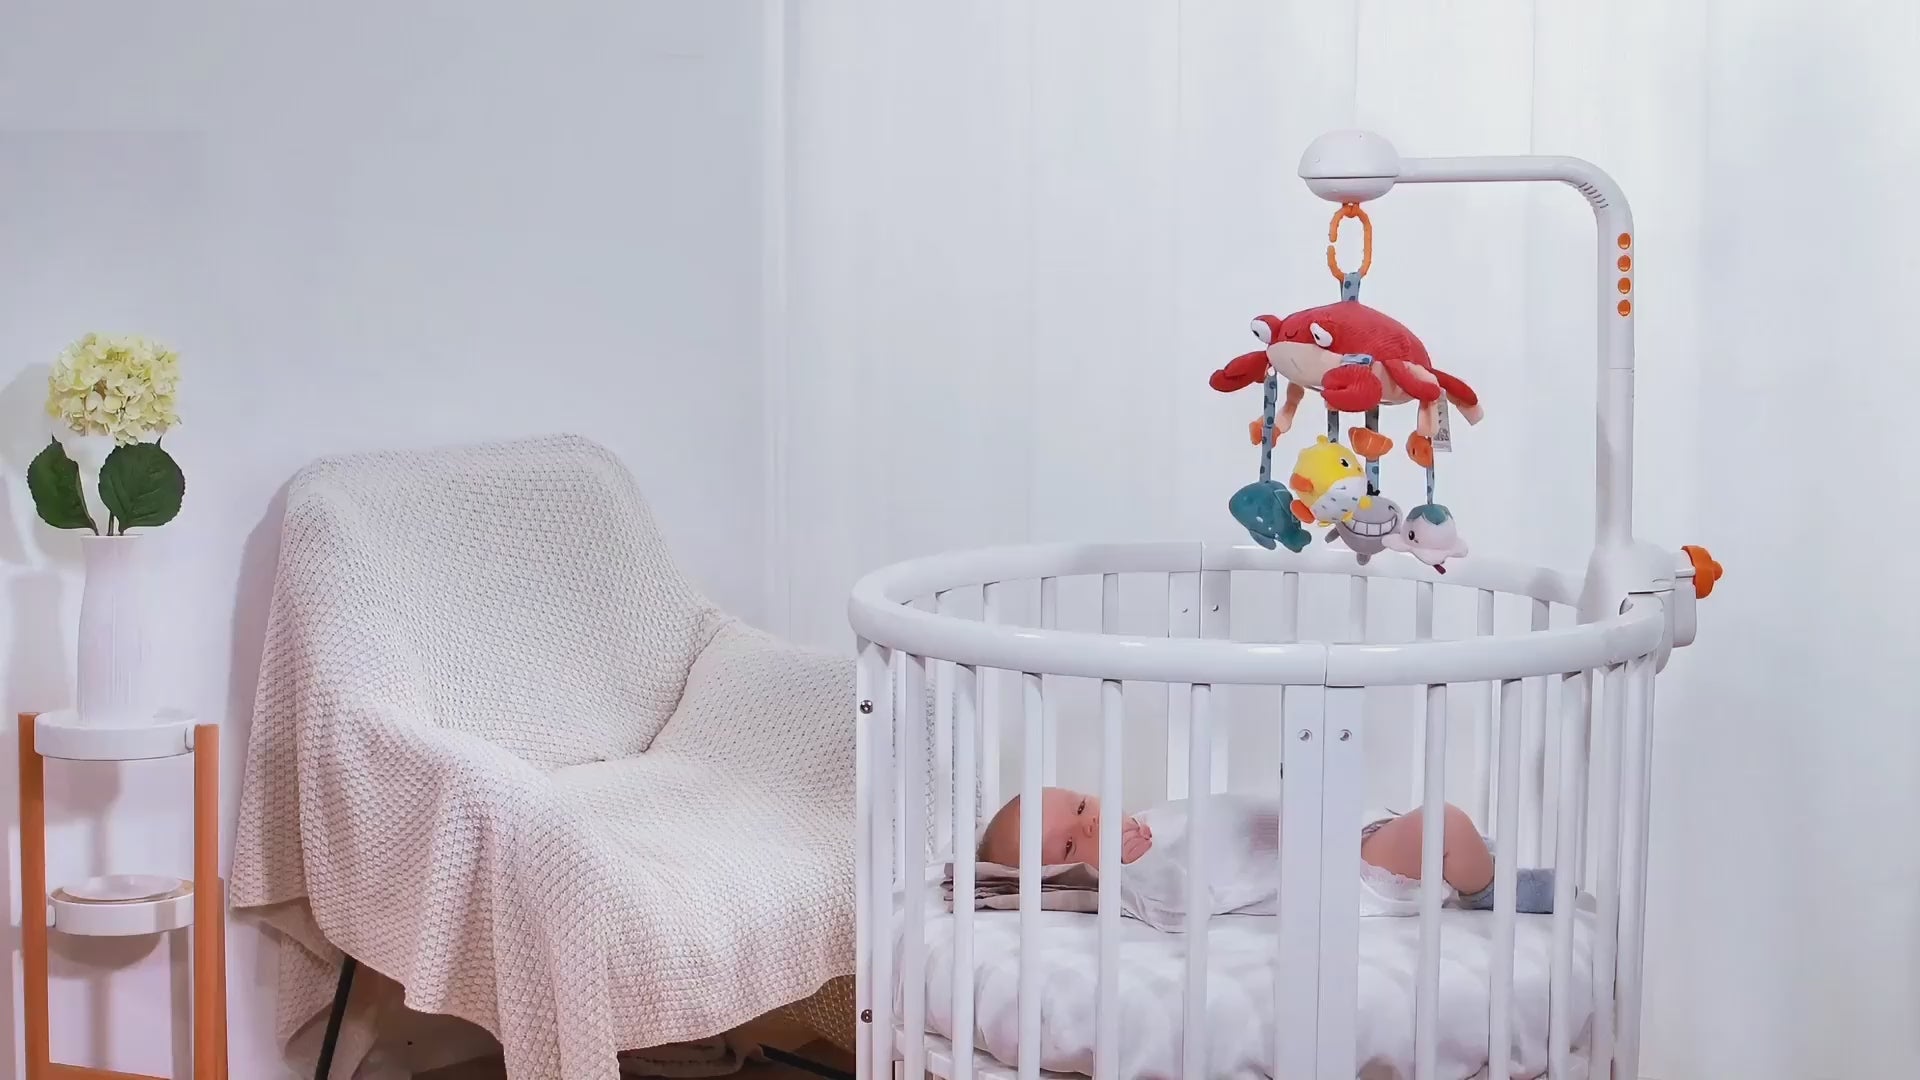 Baby-crib-mobile-during-lying-down-period